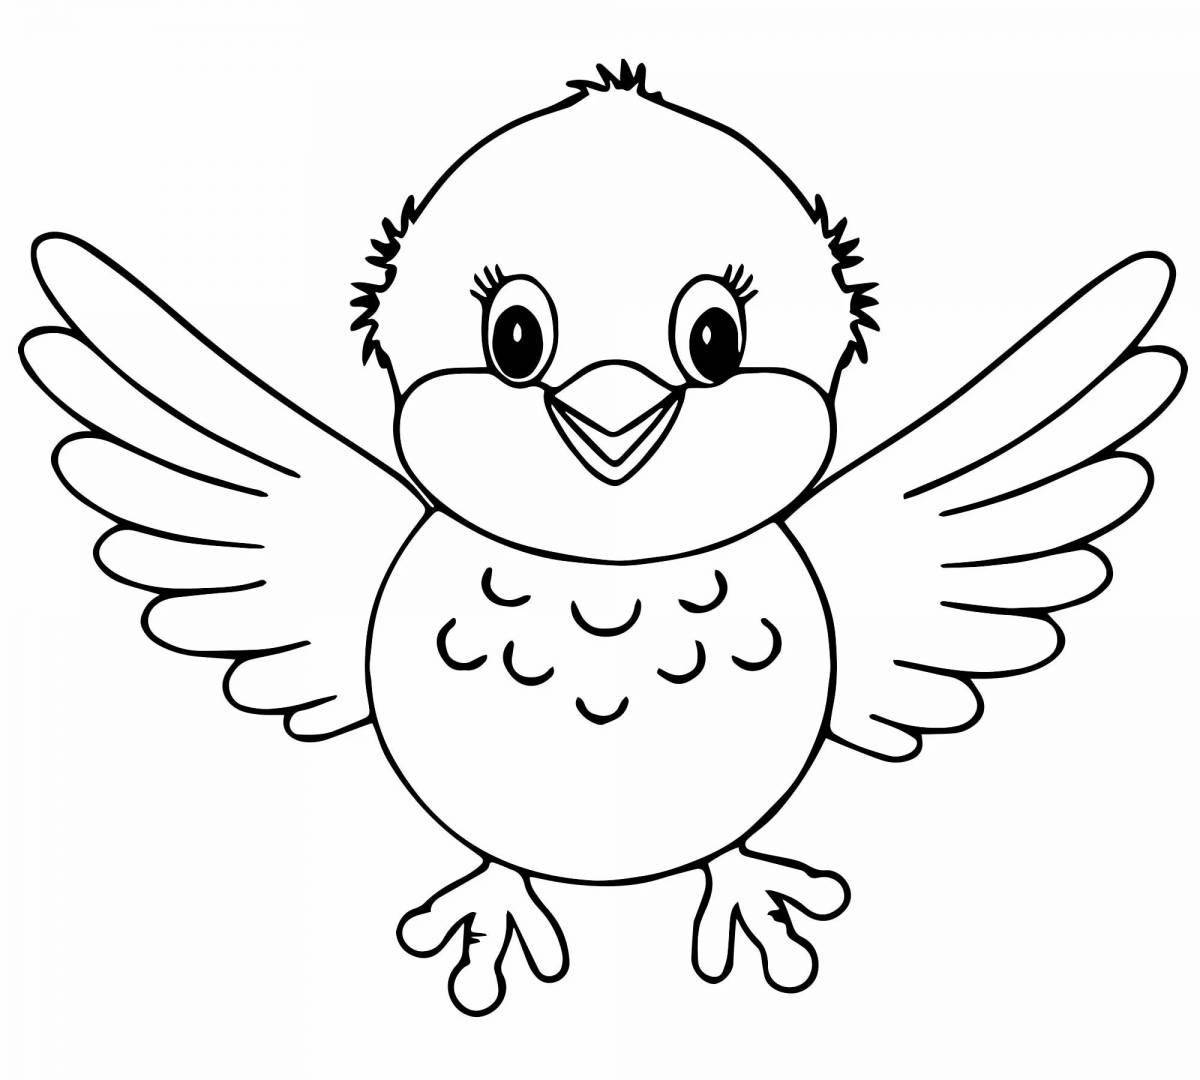 Fairy bird coloring page for 4-5 year olds